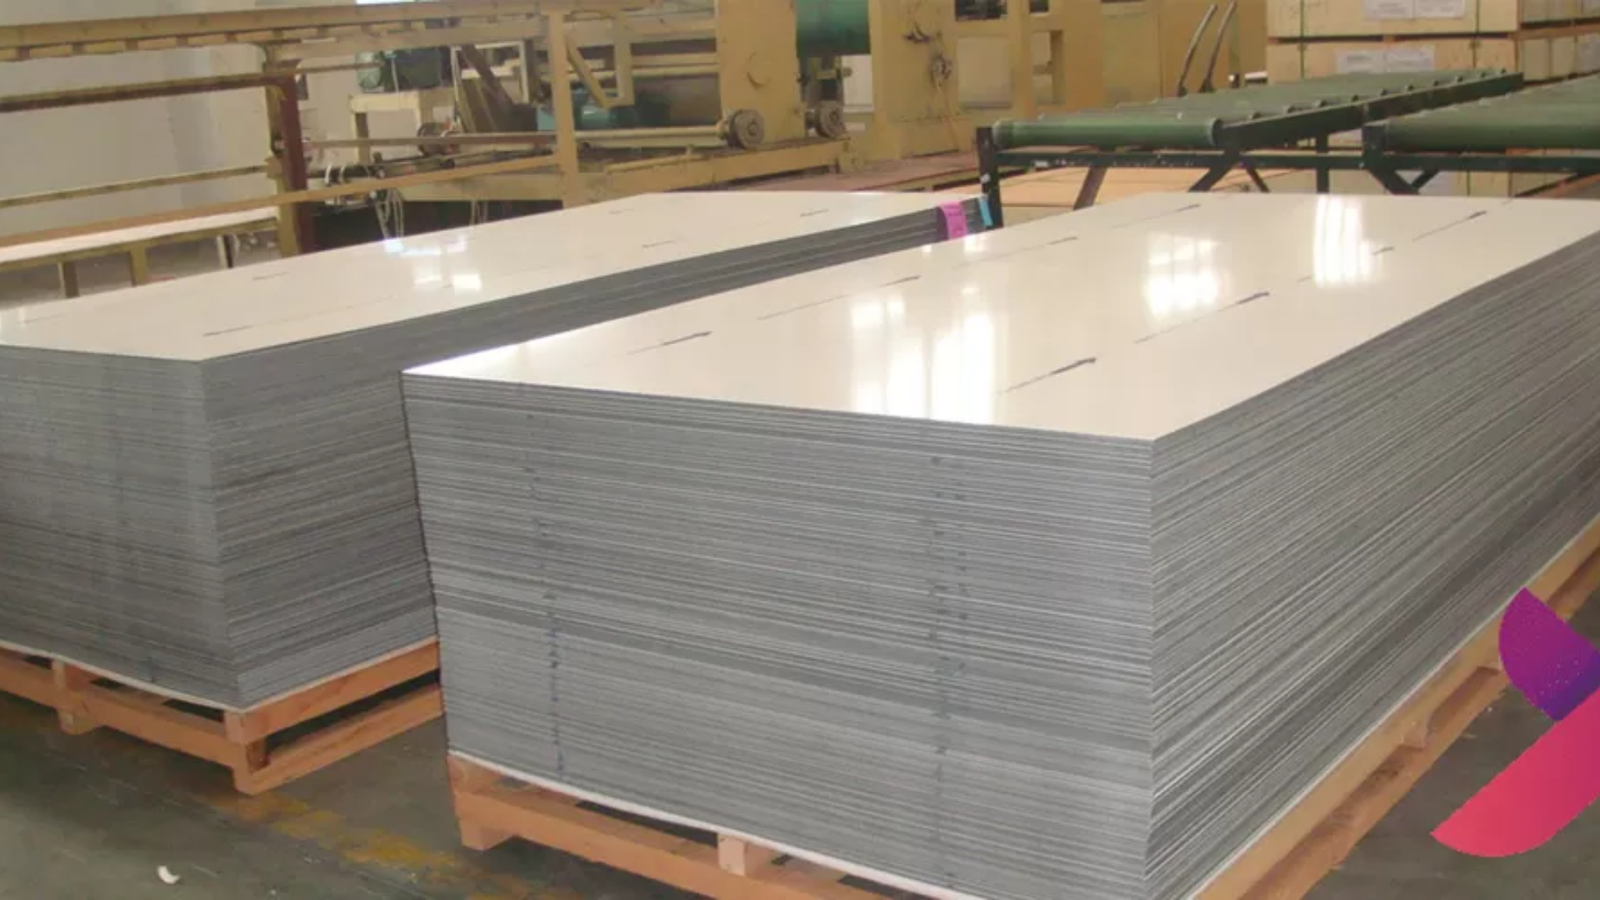 Inconel 625 sheets and plates